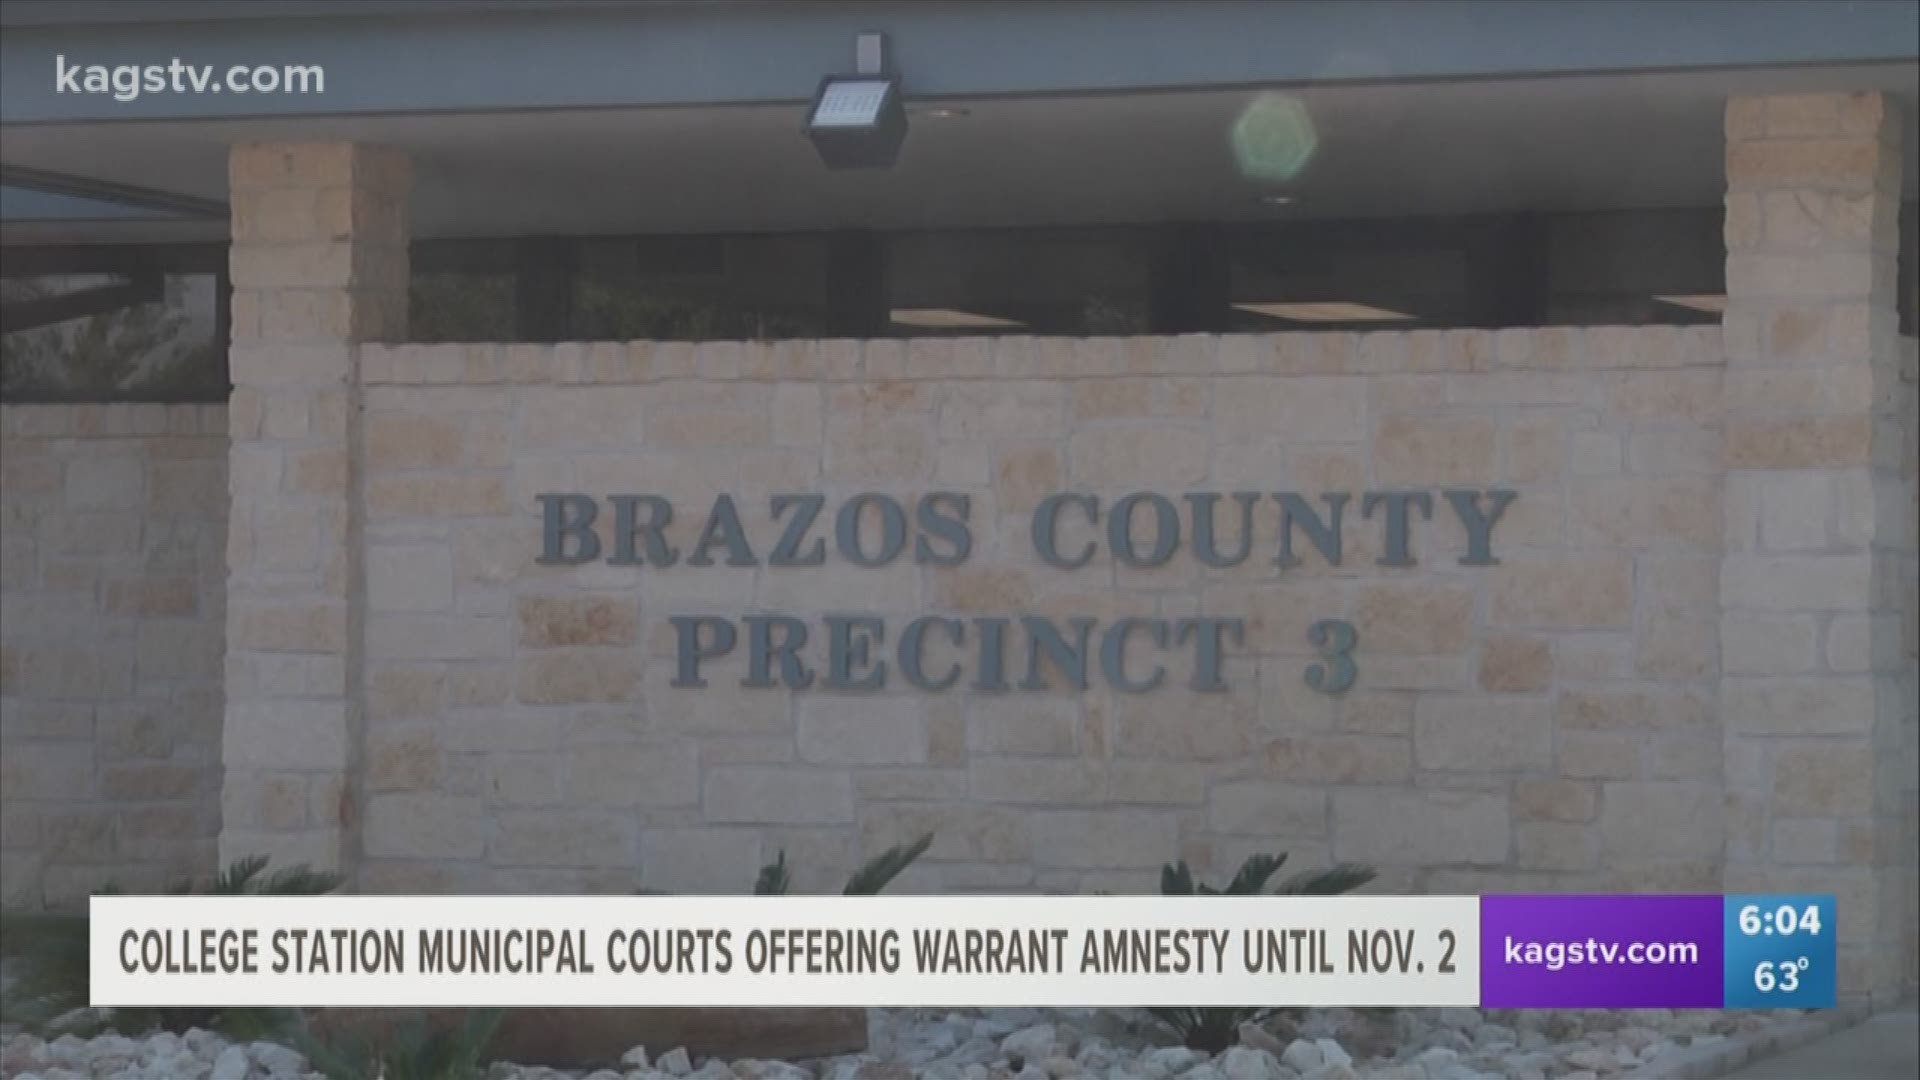 Municipal court judges are encouraging people with class C warrants to come to the court to pay their fines and avoid jail time.